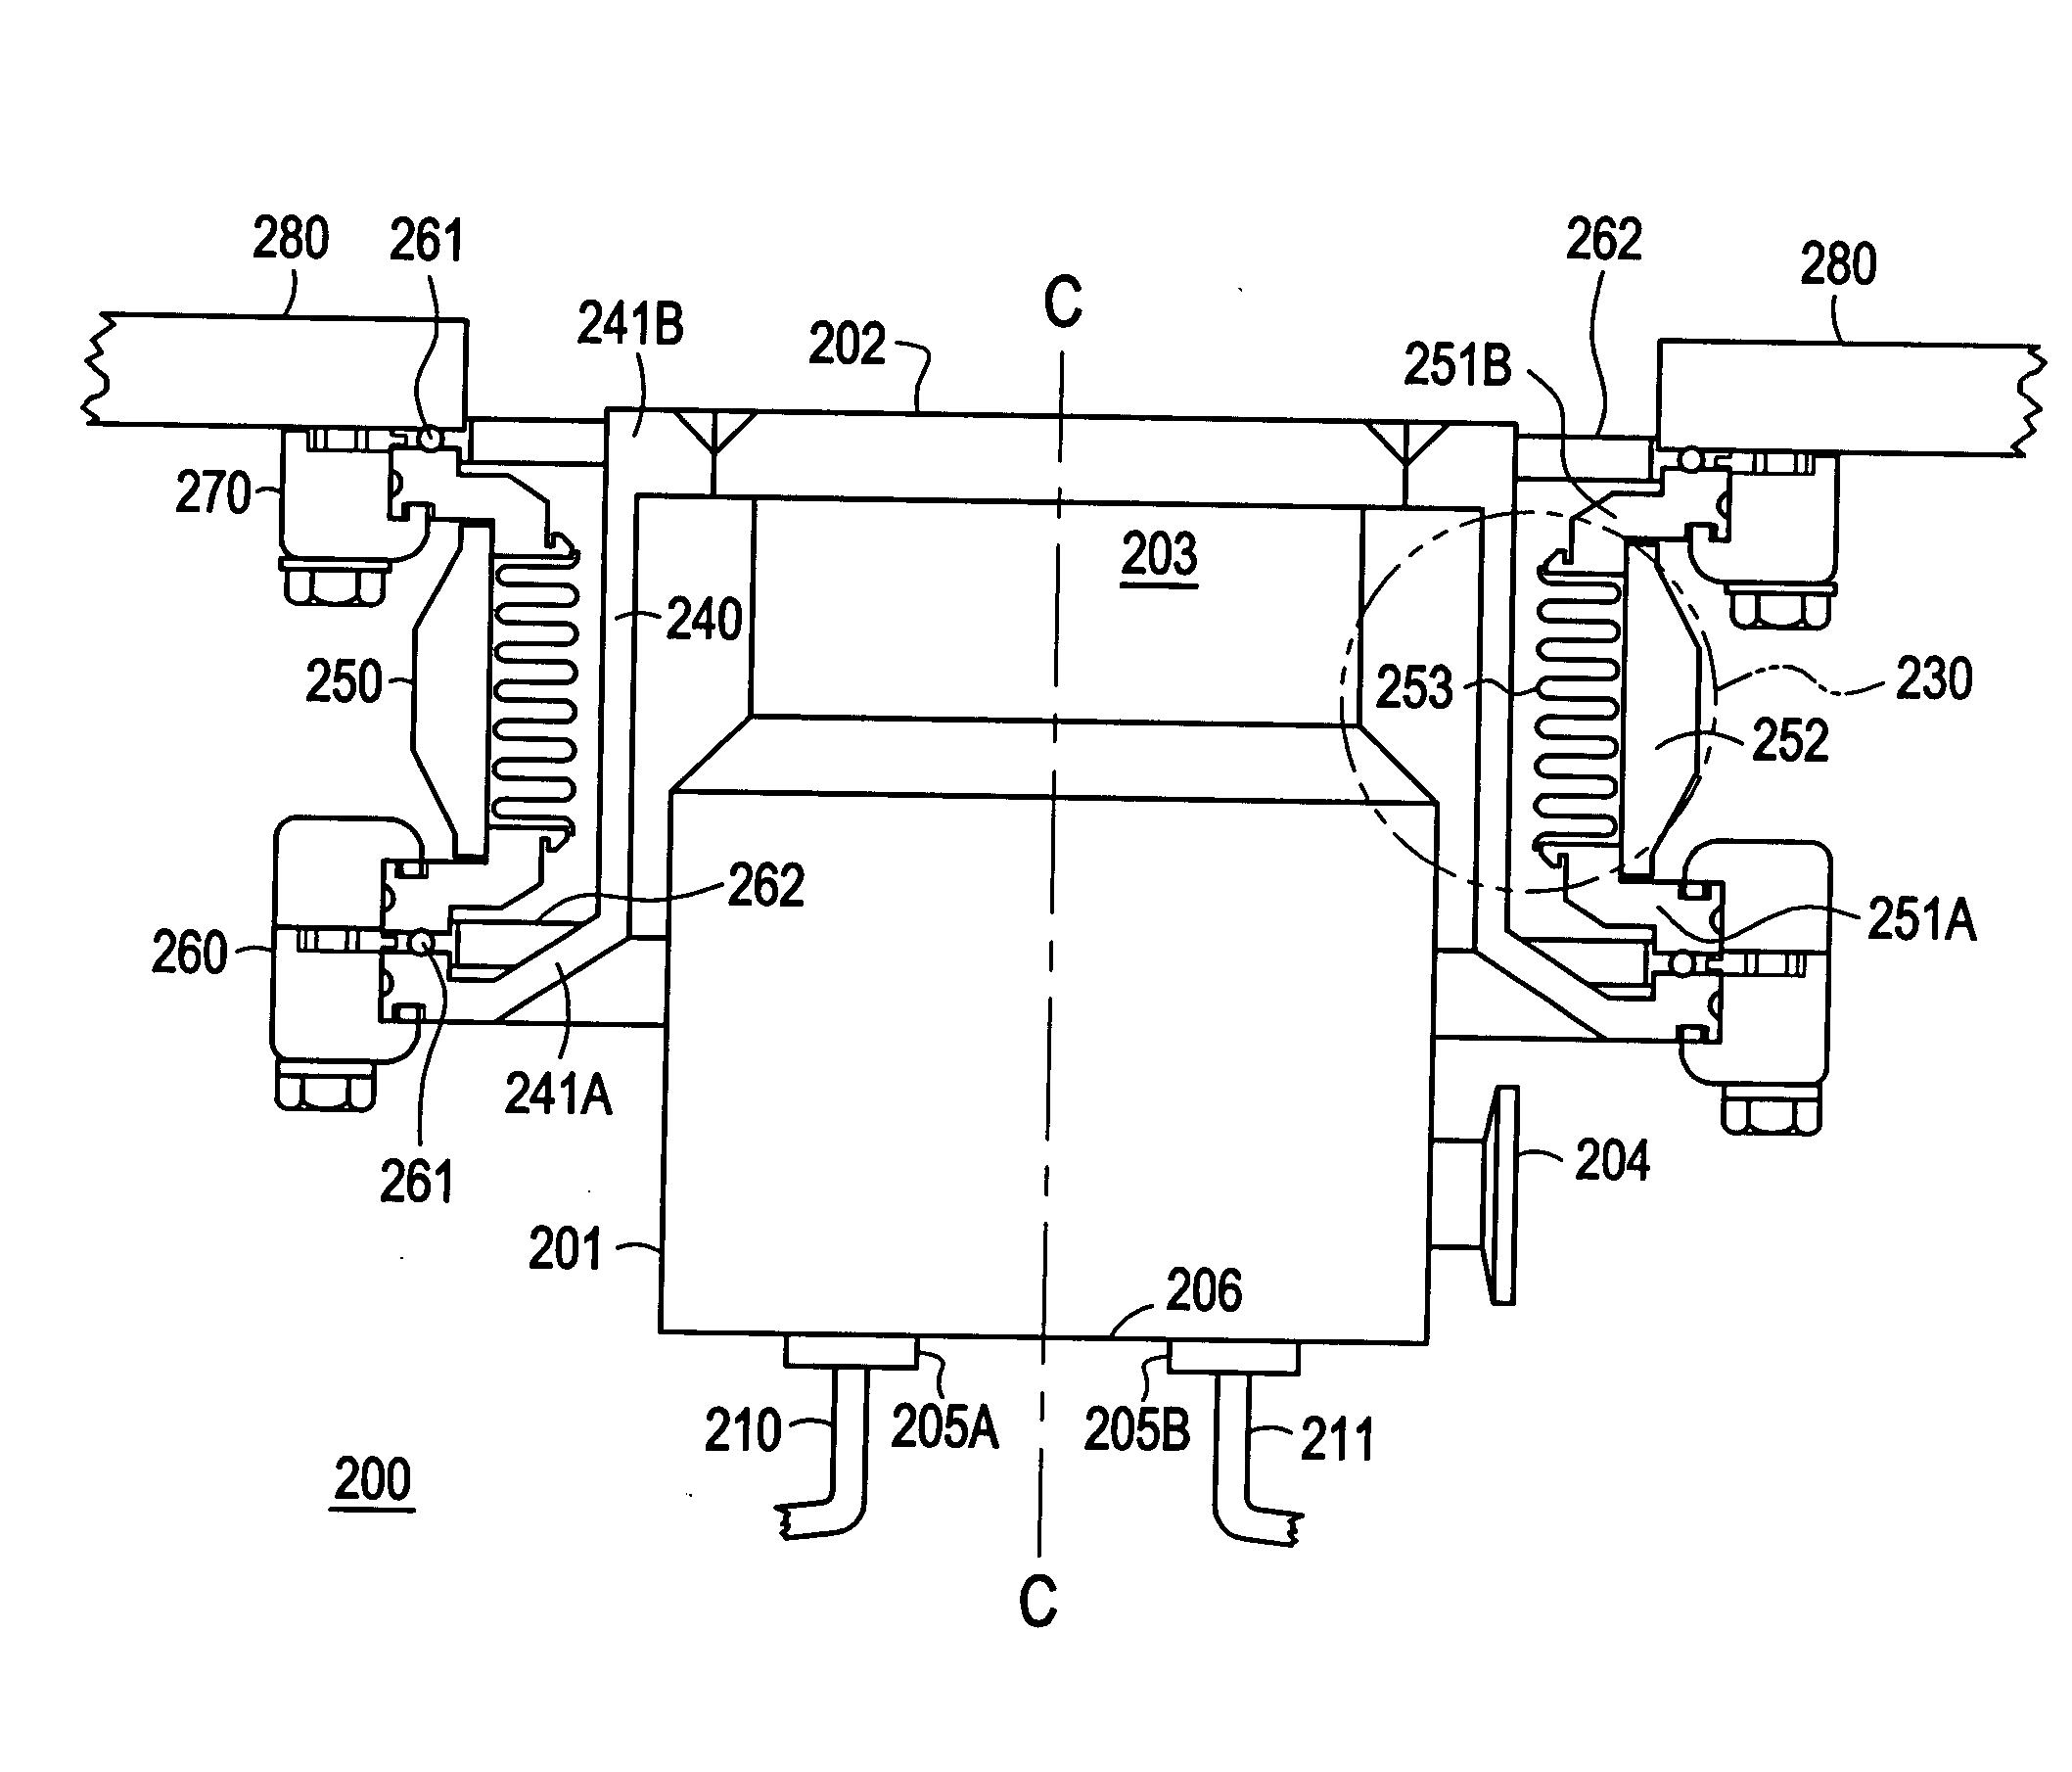 Vibration damper with nested turbo molecular pump